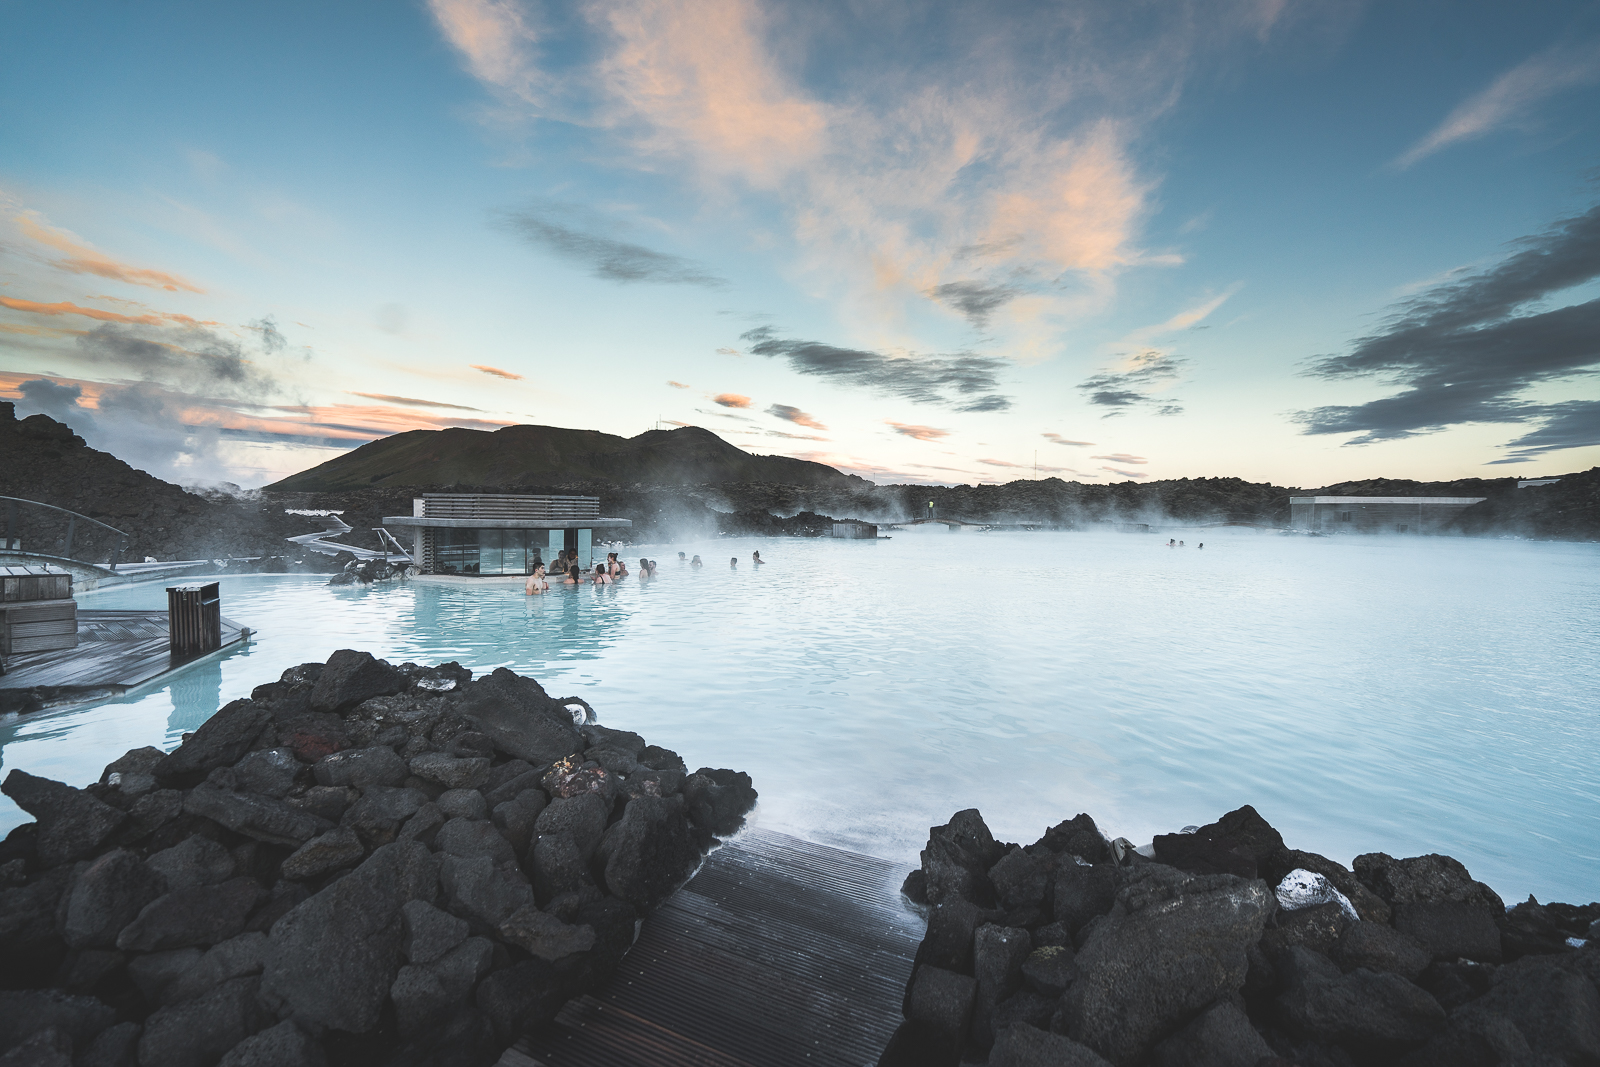 The Blue Lagoon is a mystical geothermal spa surrounded by jagged lava.